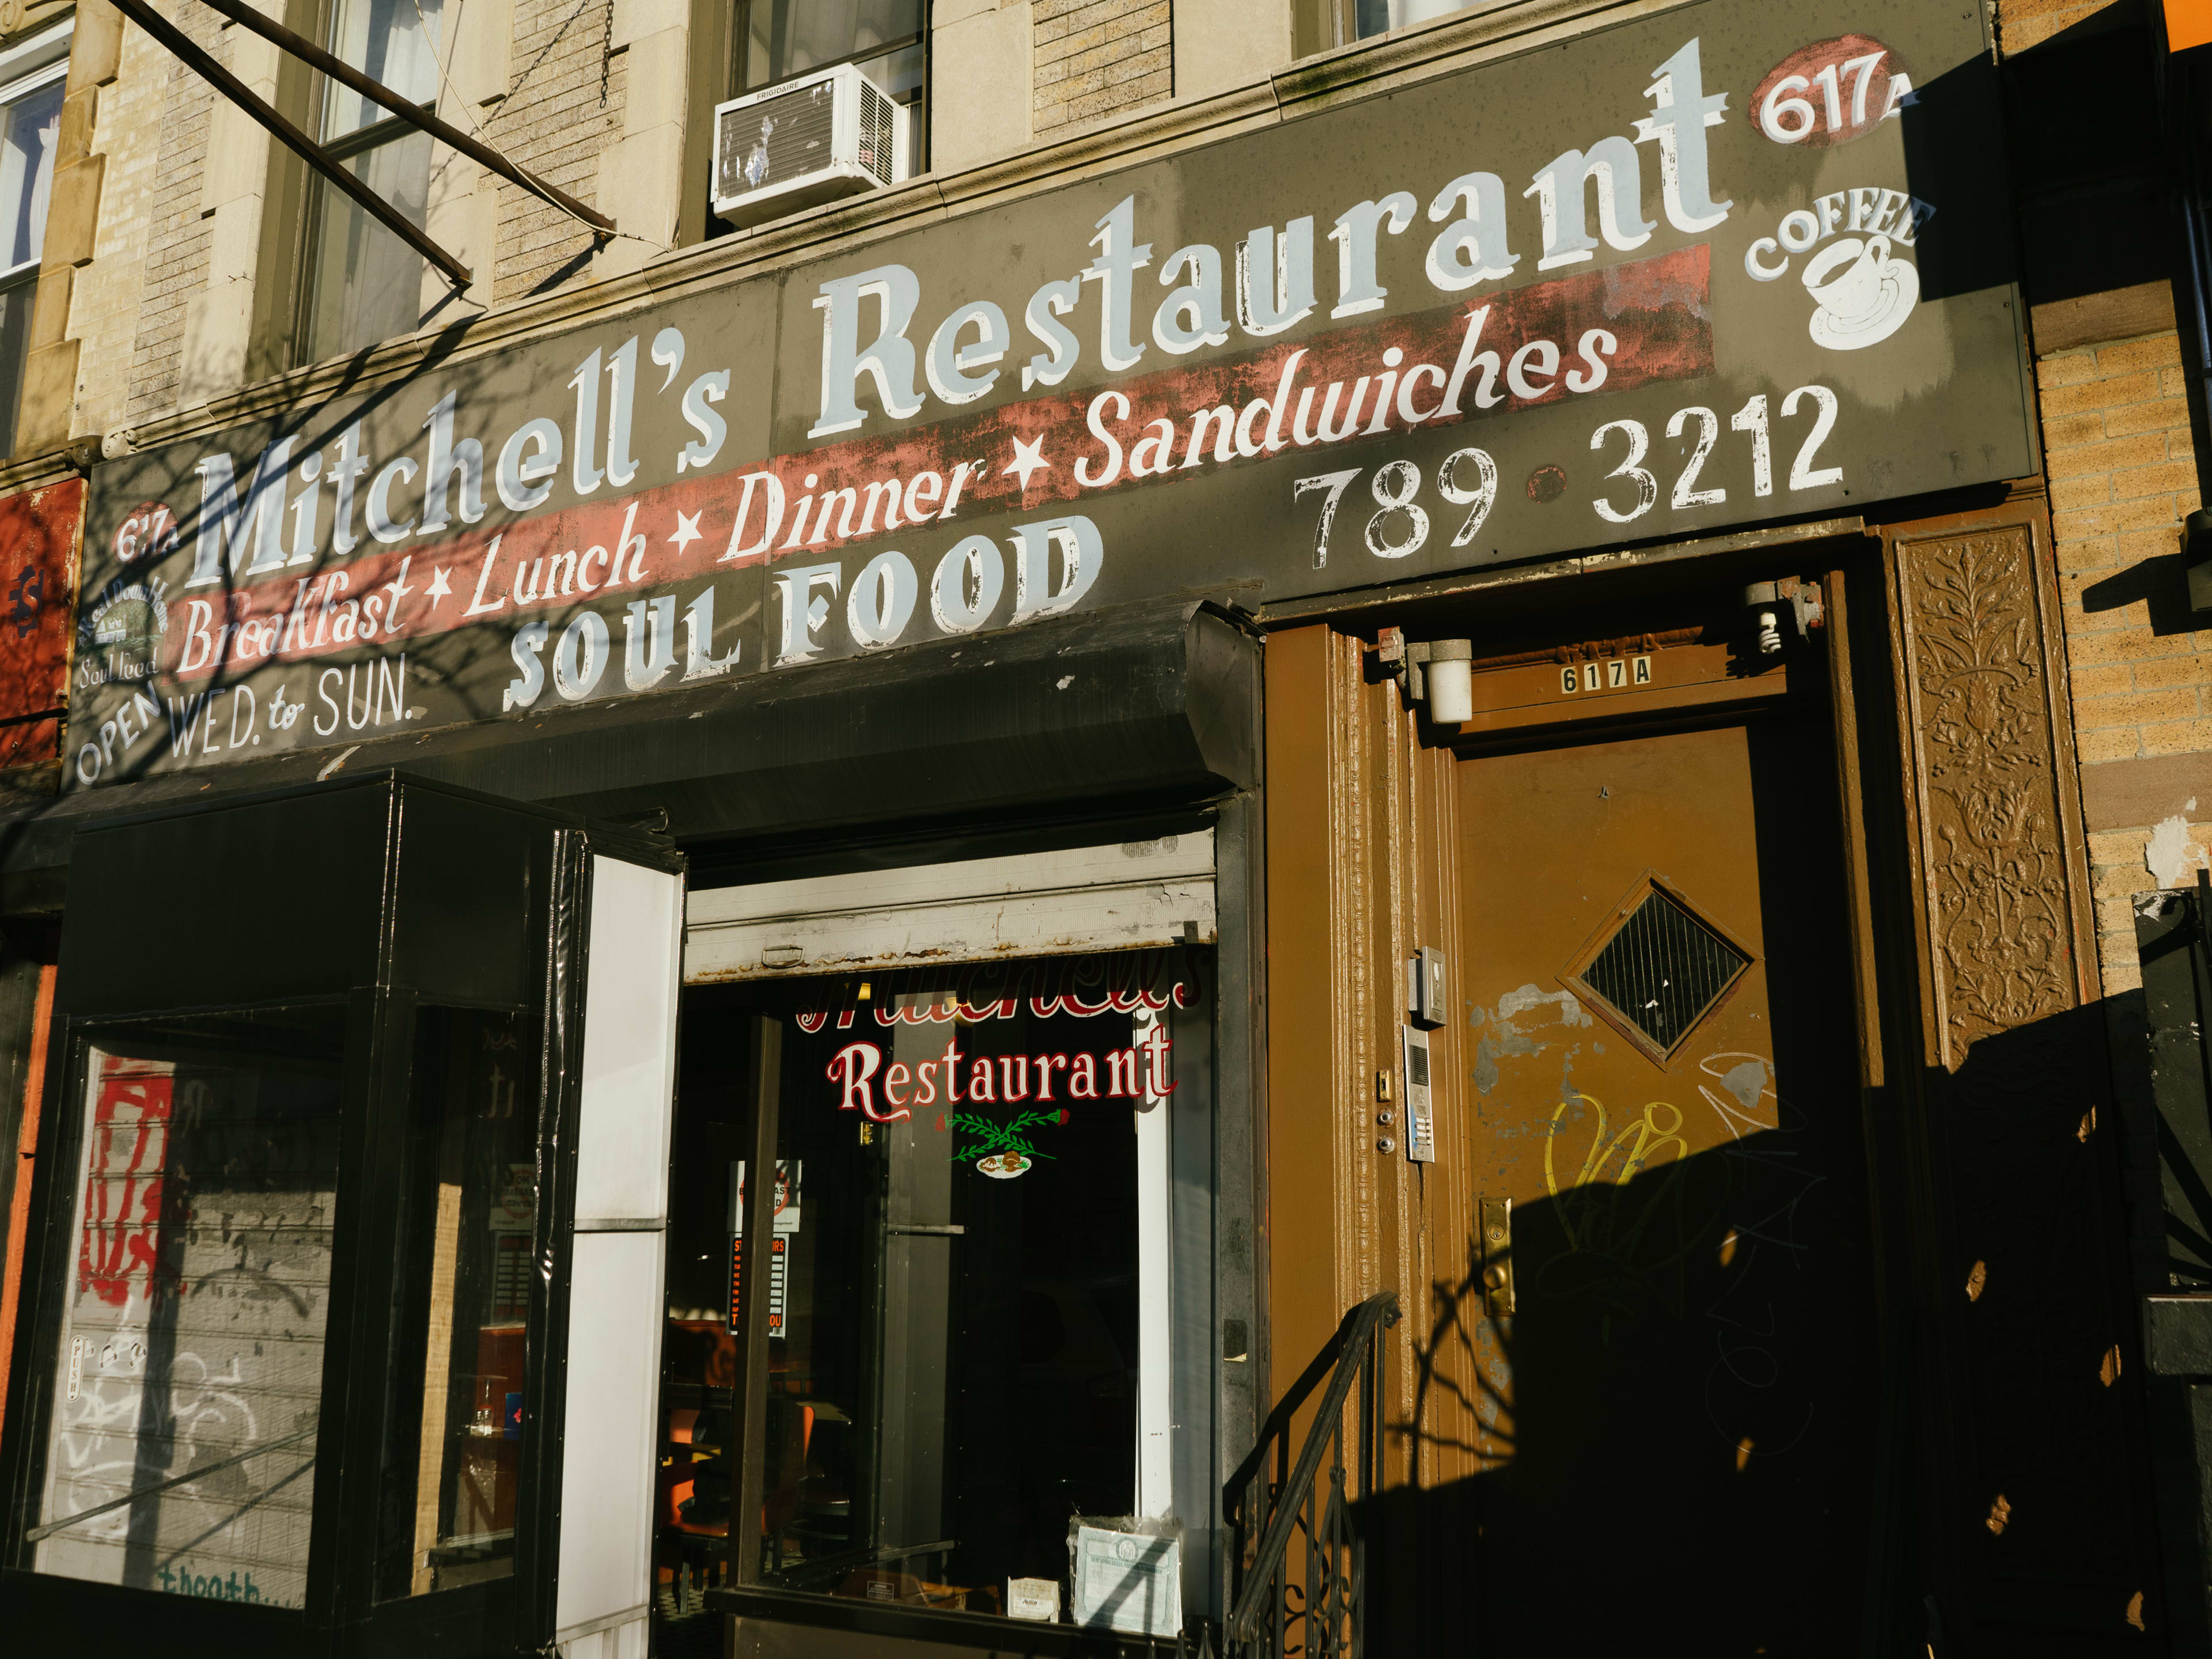 Mitchell’s Soul Food image